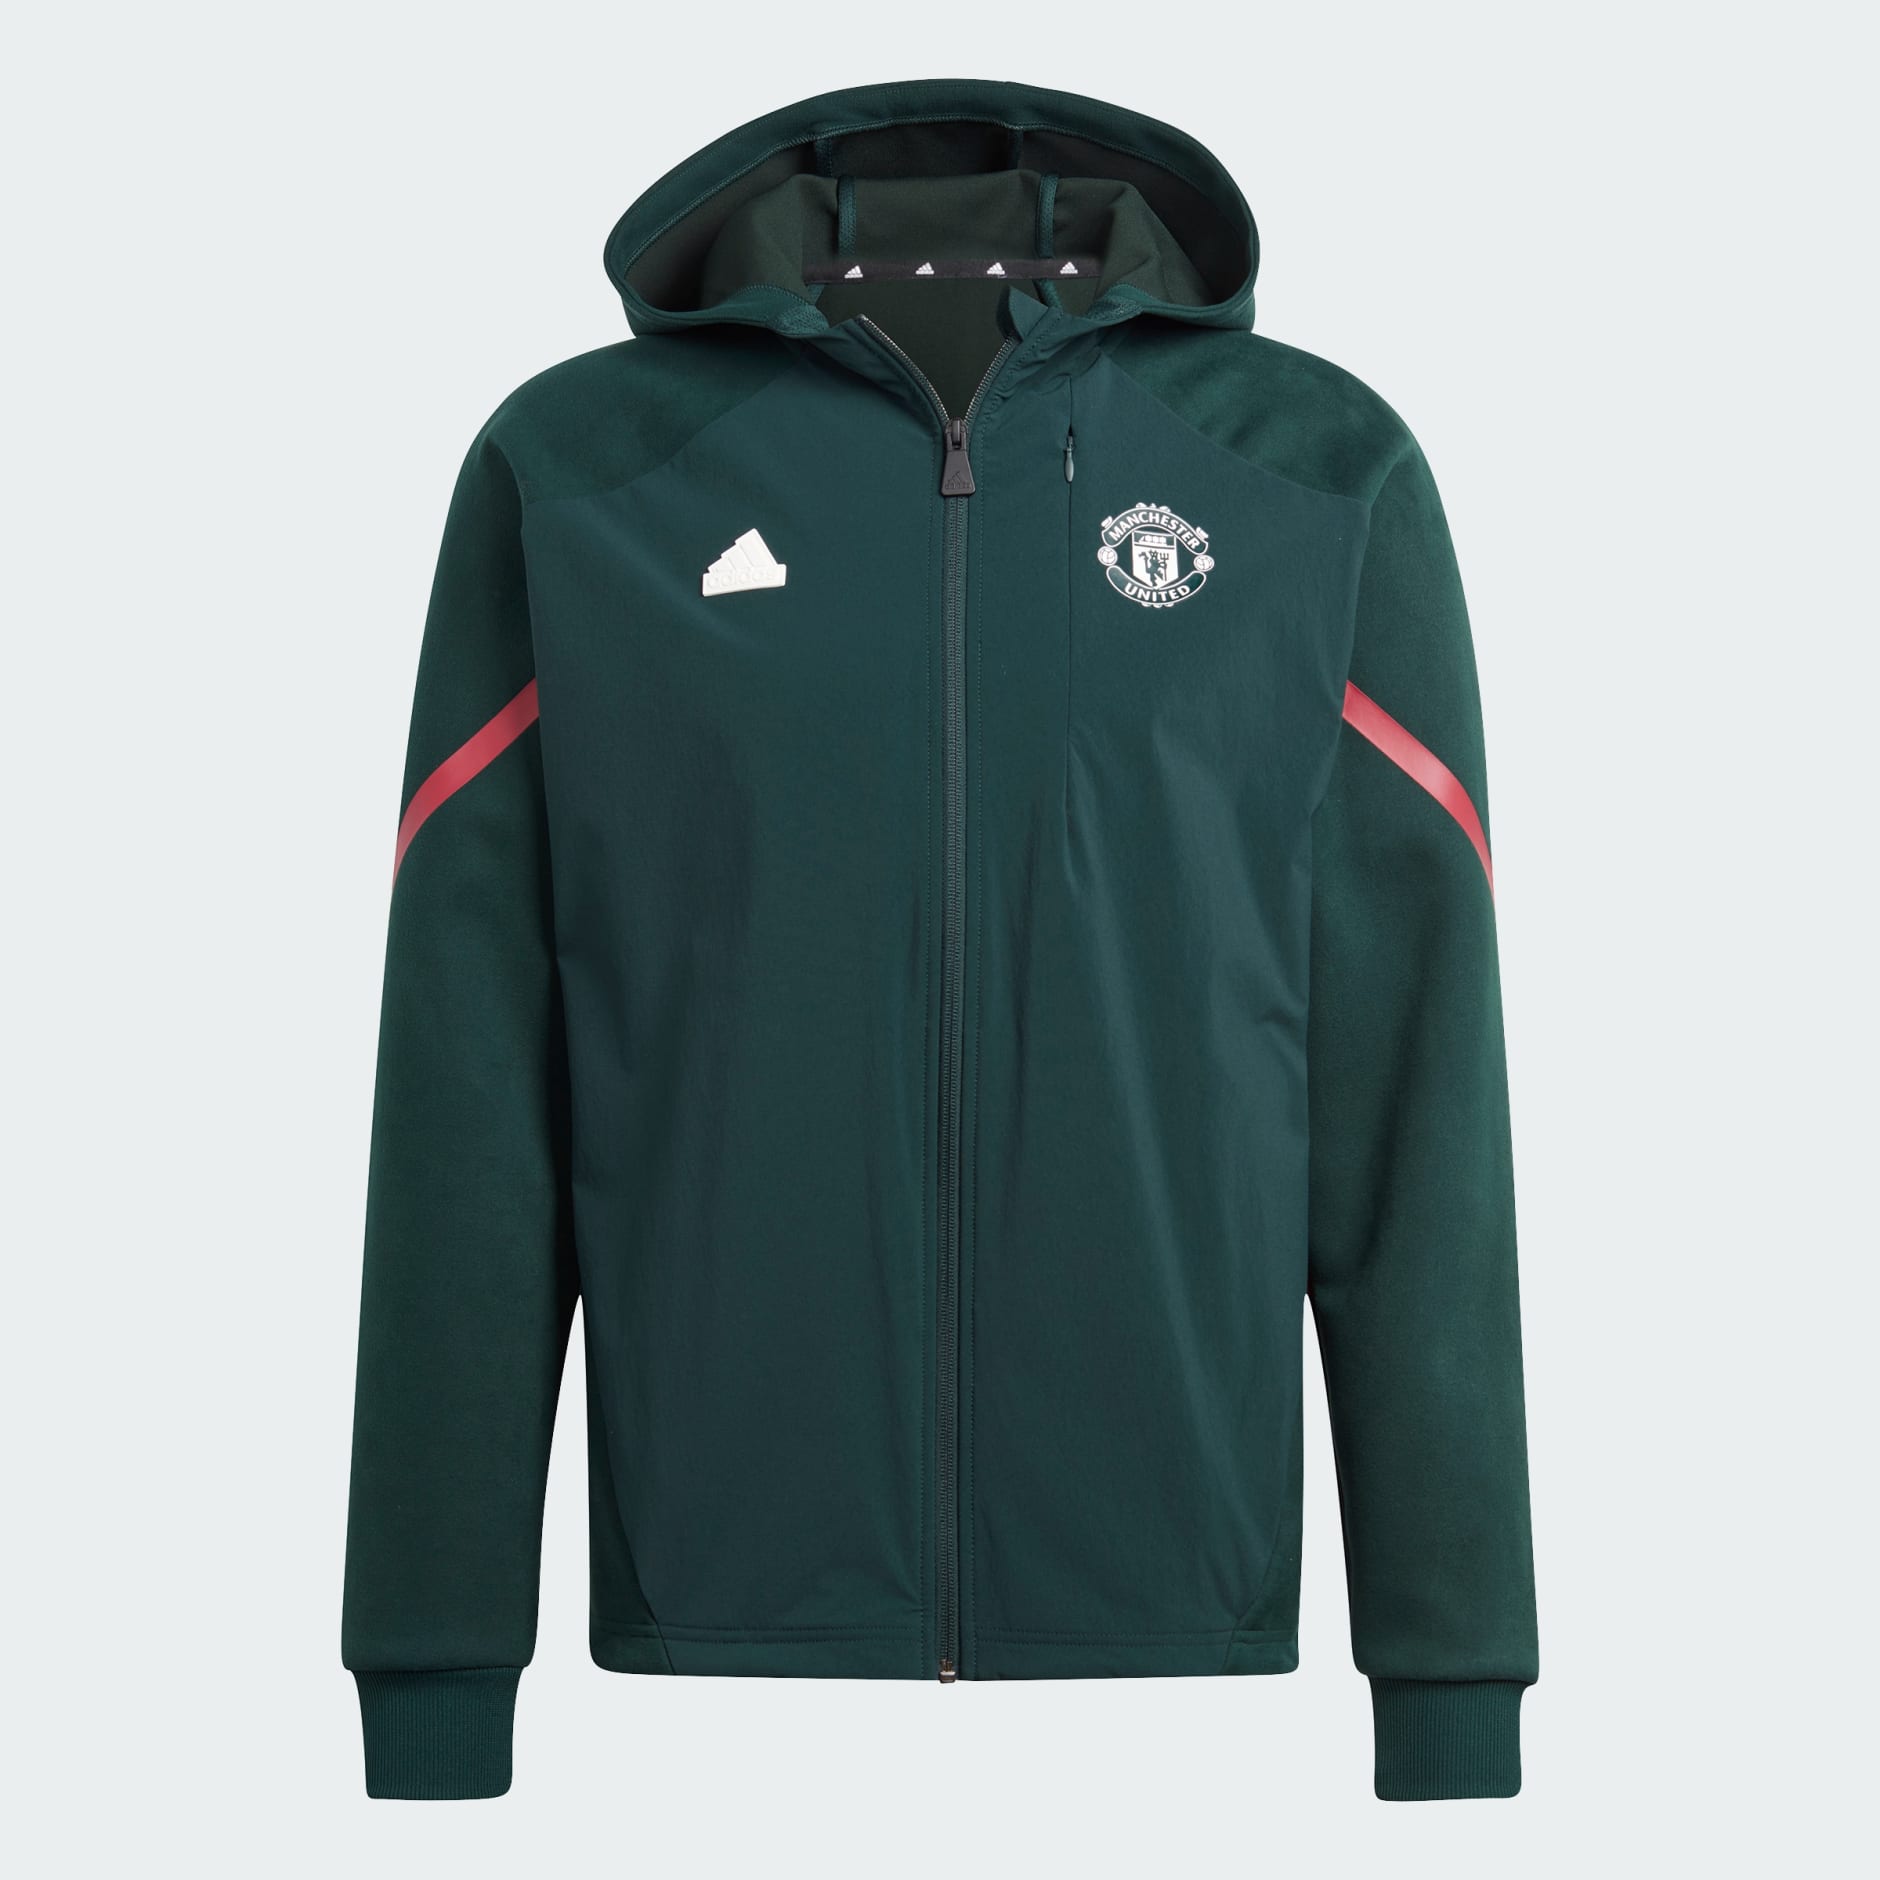 adidas Performance REAL MADRID DESIGNED FOR GAMEDAY FULL ZIP